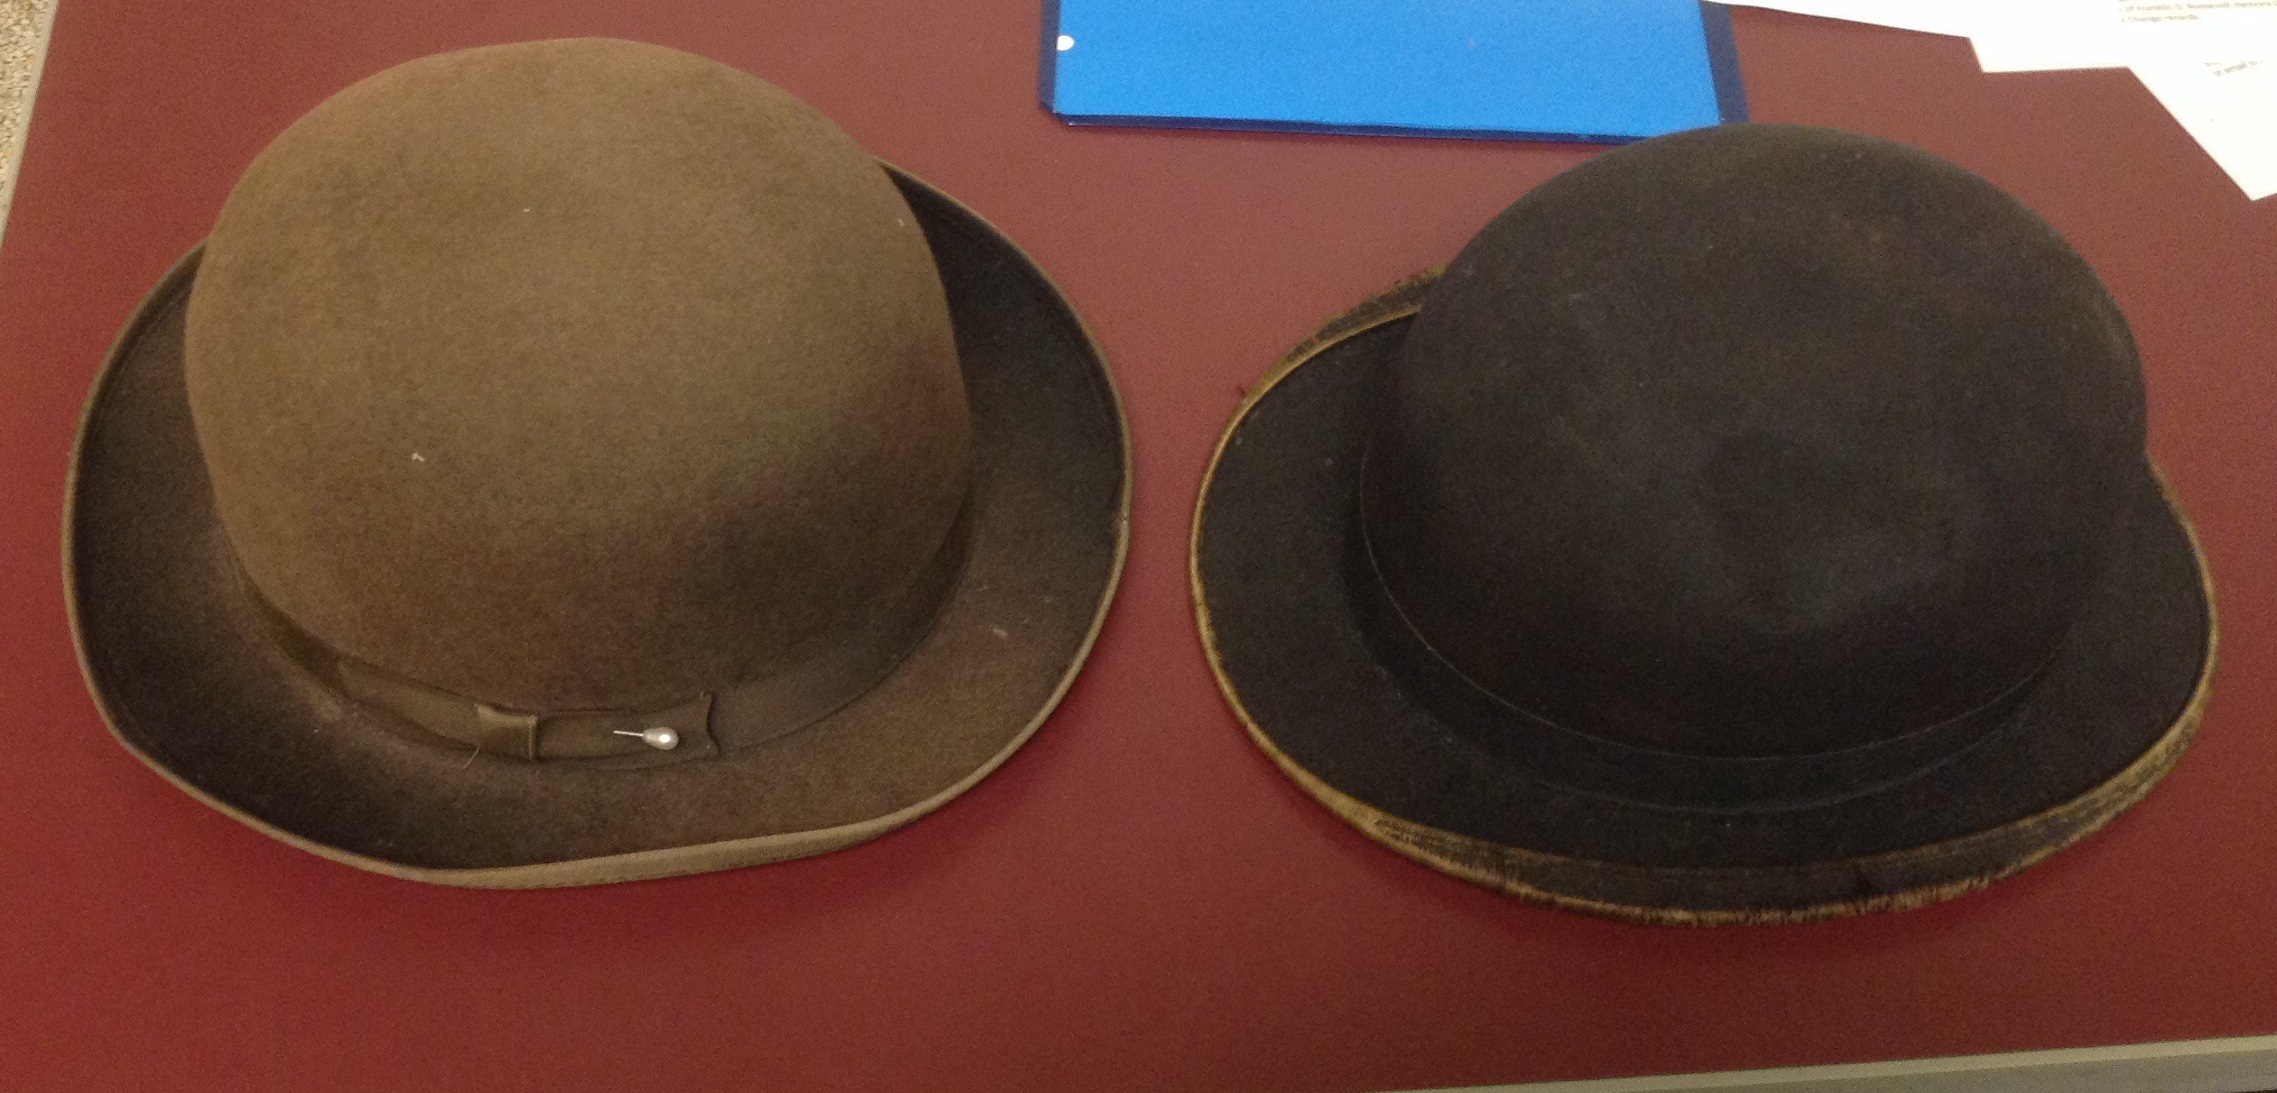 Two bowler hats from the University Archives